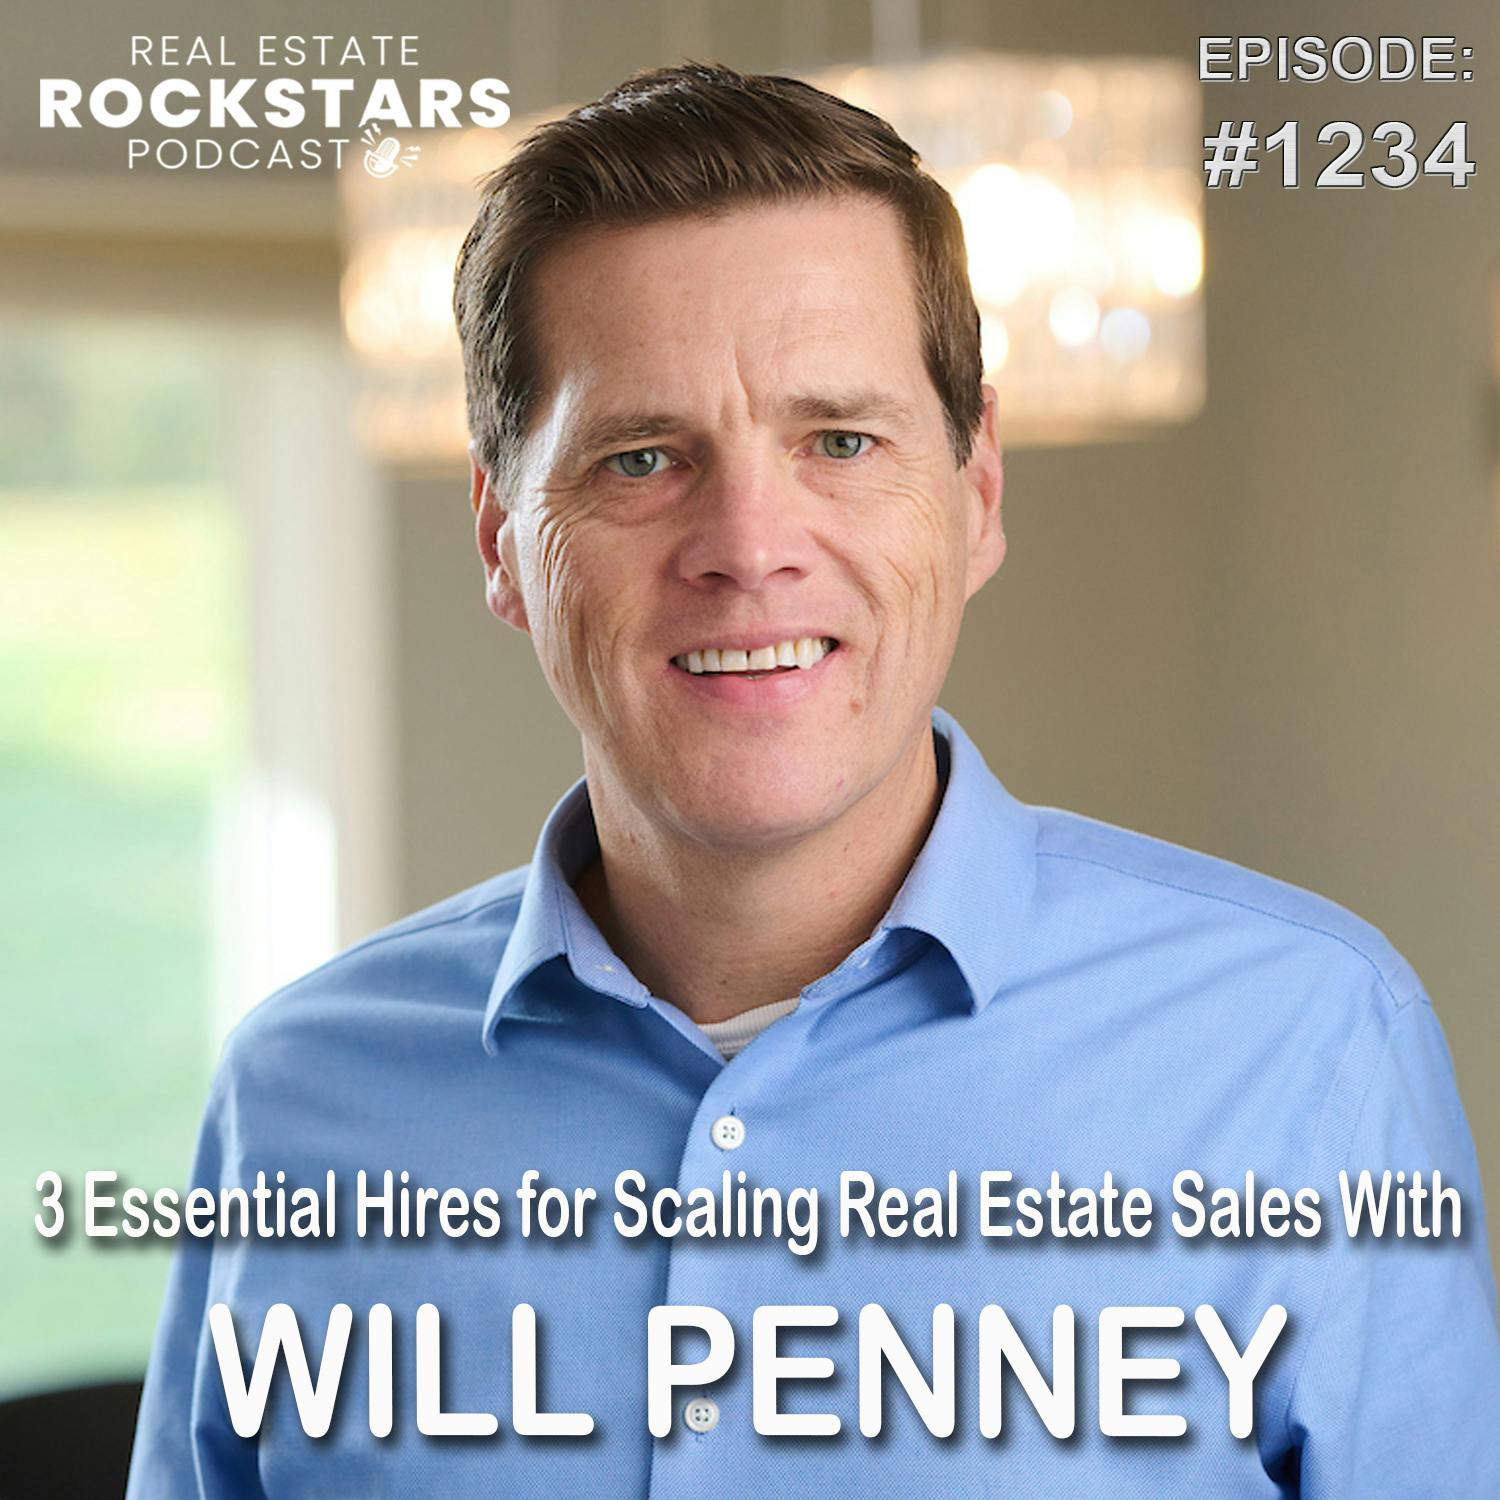 1234: 3 Essential Hires for Scaling Real Estate Sales With Will Penney